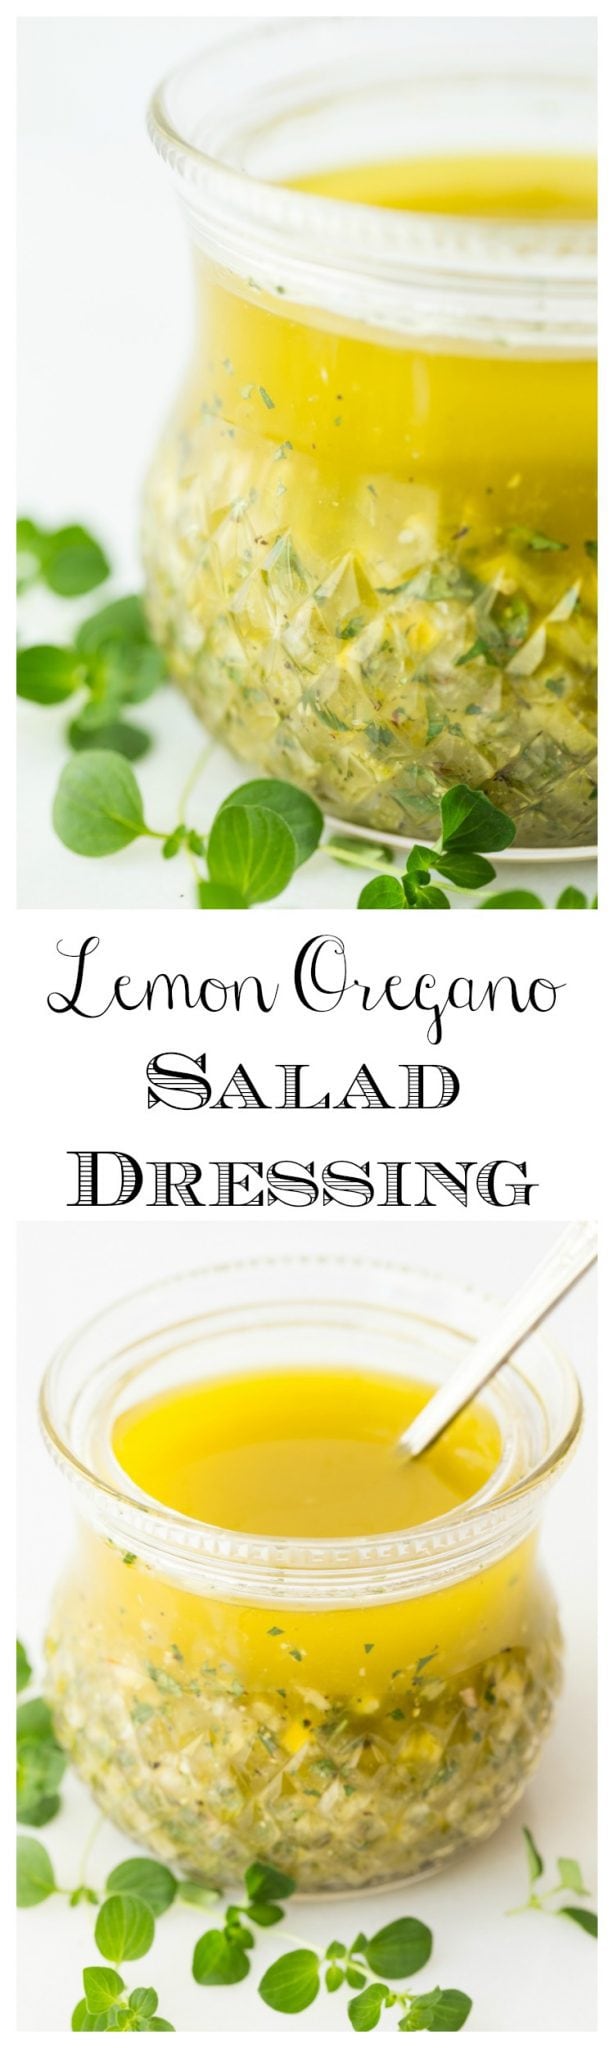 Lemon Oregano Salad Dressing - Lemon Oregano Salad Dressing - with bright, fresh lemon flavor, this dressing is delicious on just about any salad but it's also wonderful on grilled chicken, shrimp and pork, roasted veggies, steamed potatoes...